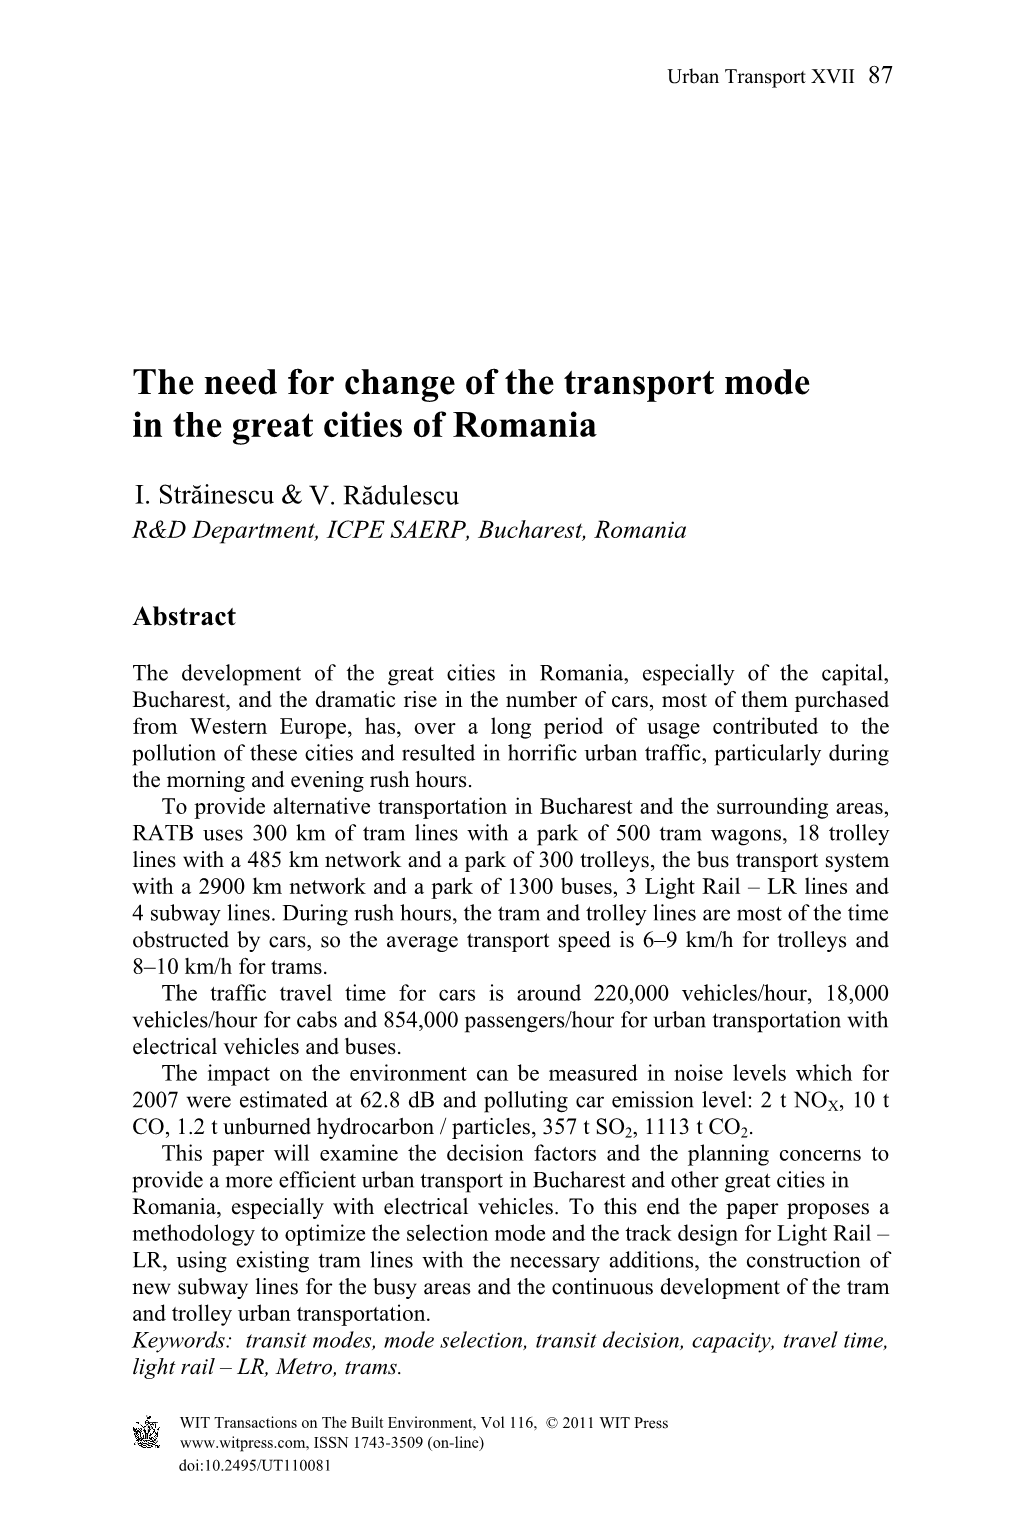 The Need for Change of the Transport Mode in the Great Cities of Romania